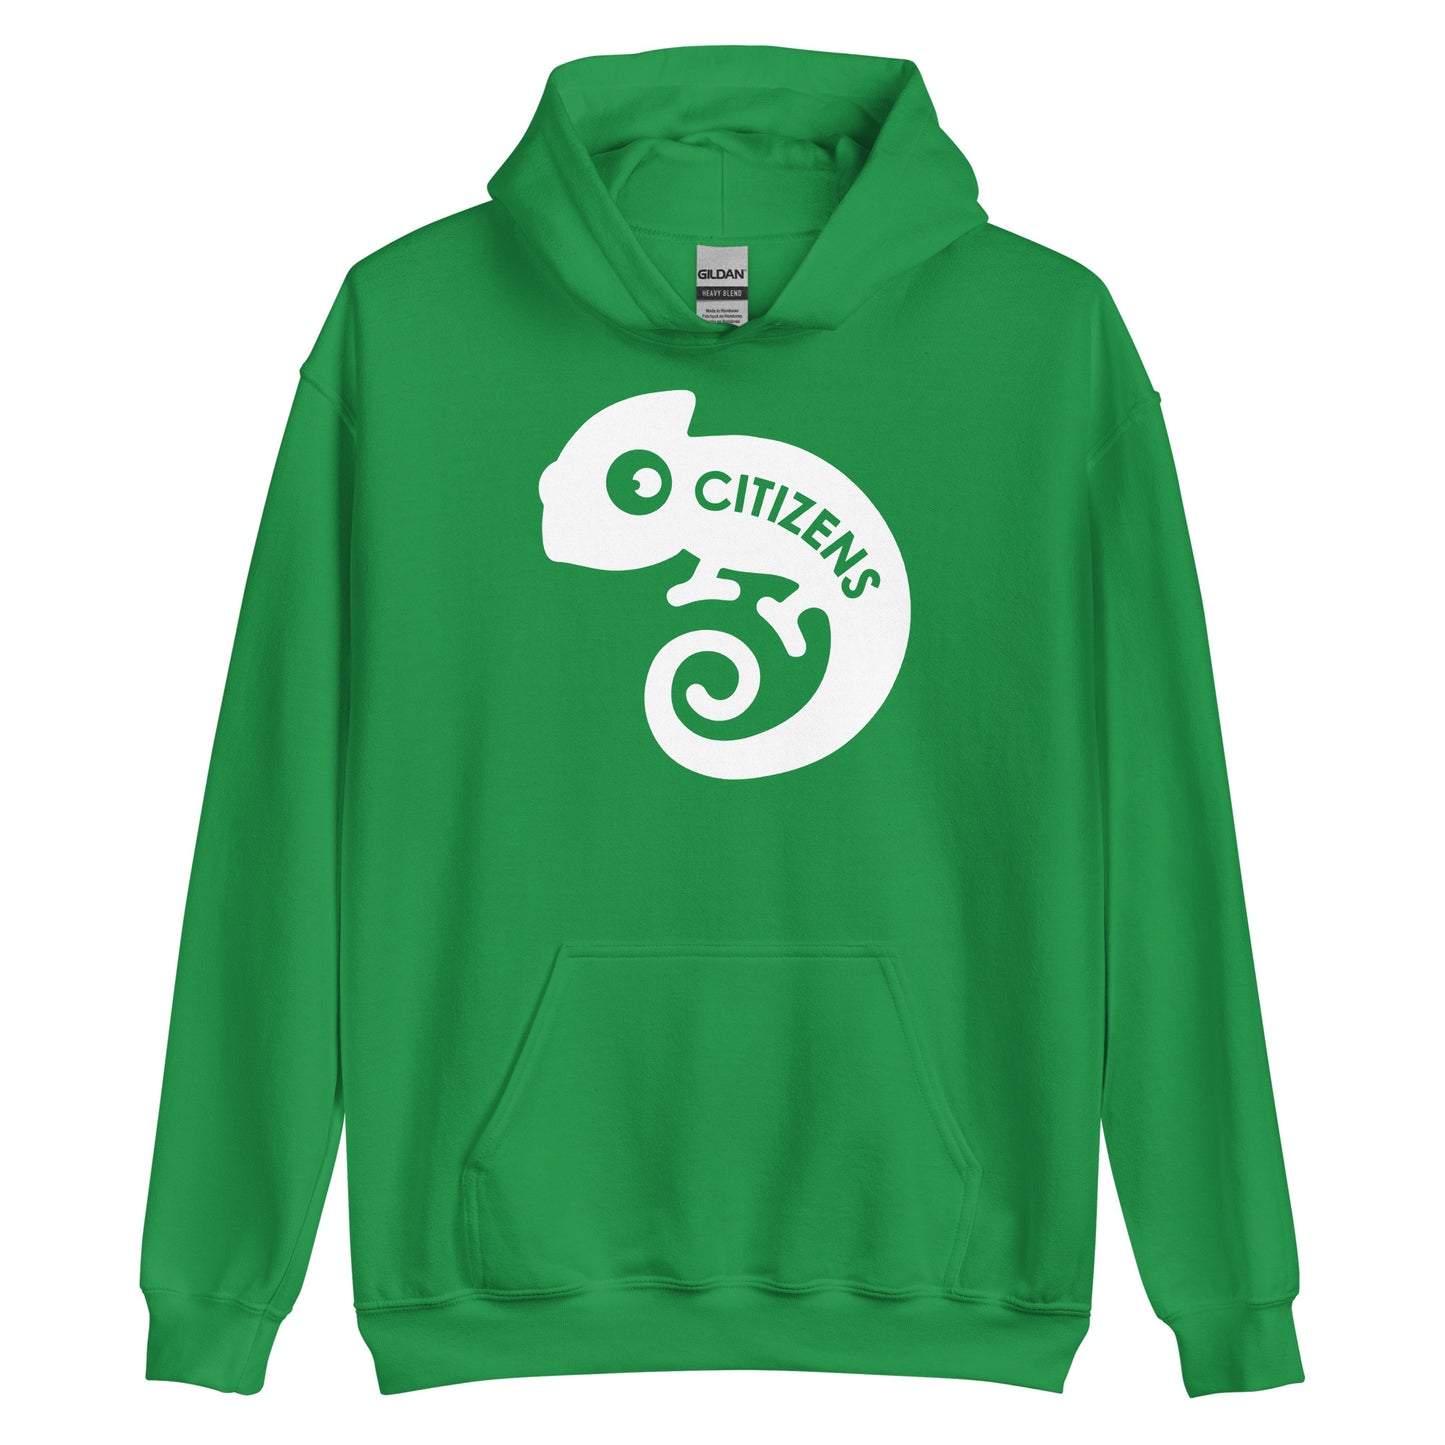 Citizens of the World White Logo Adult Hoodie